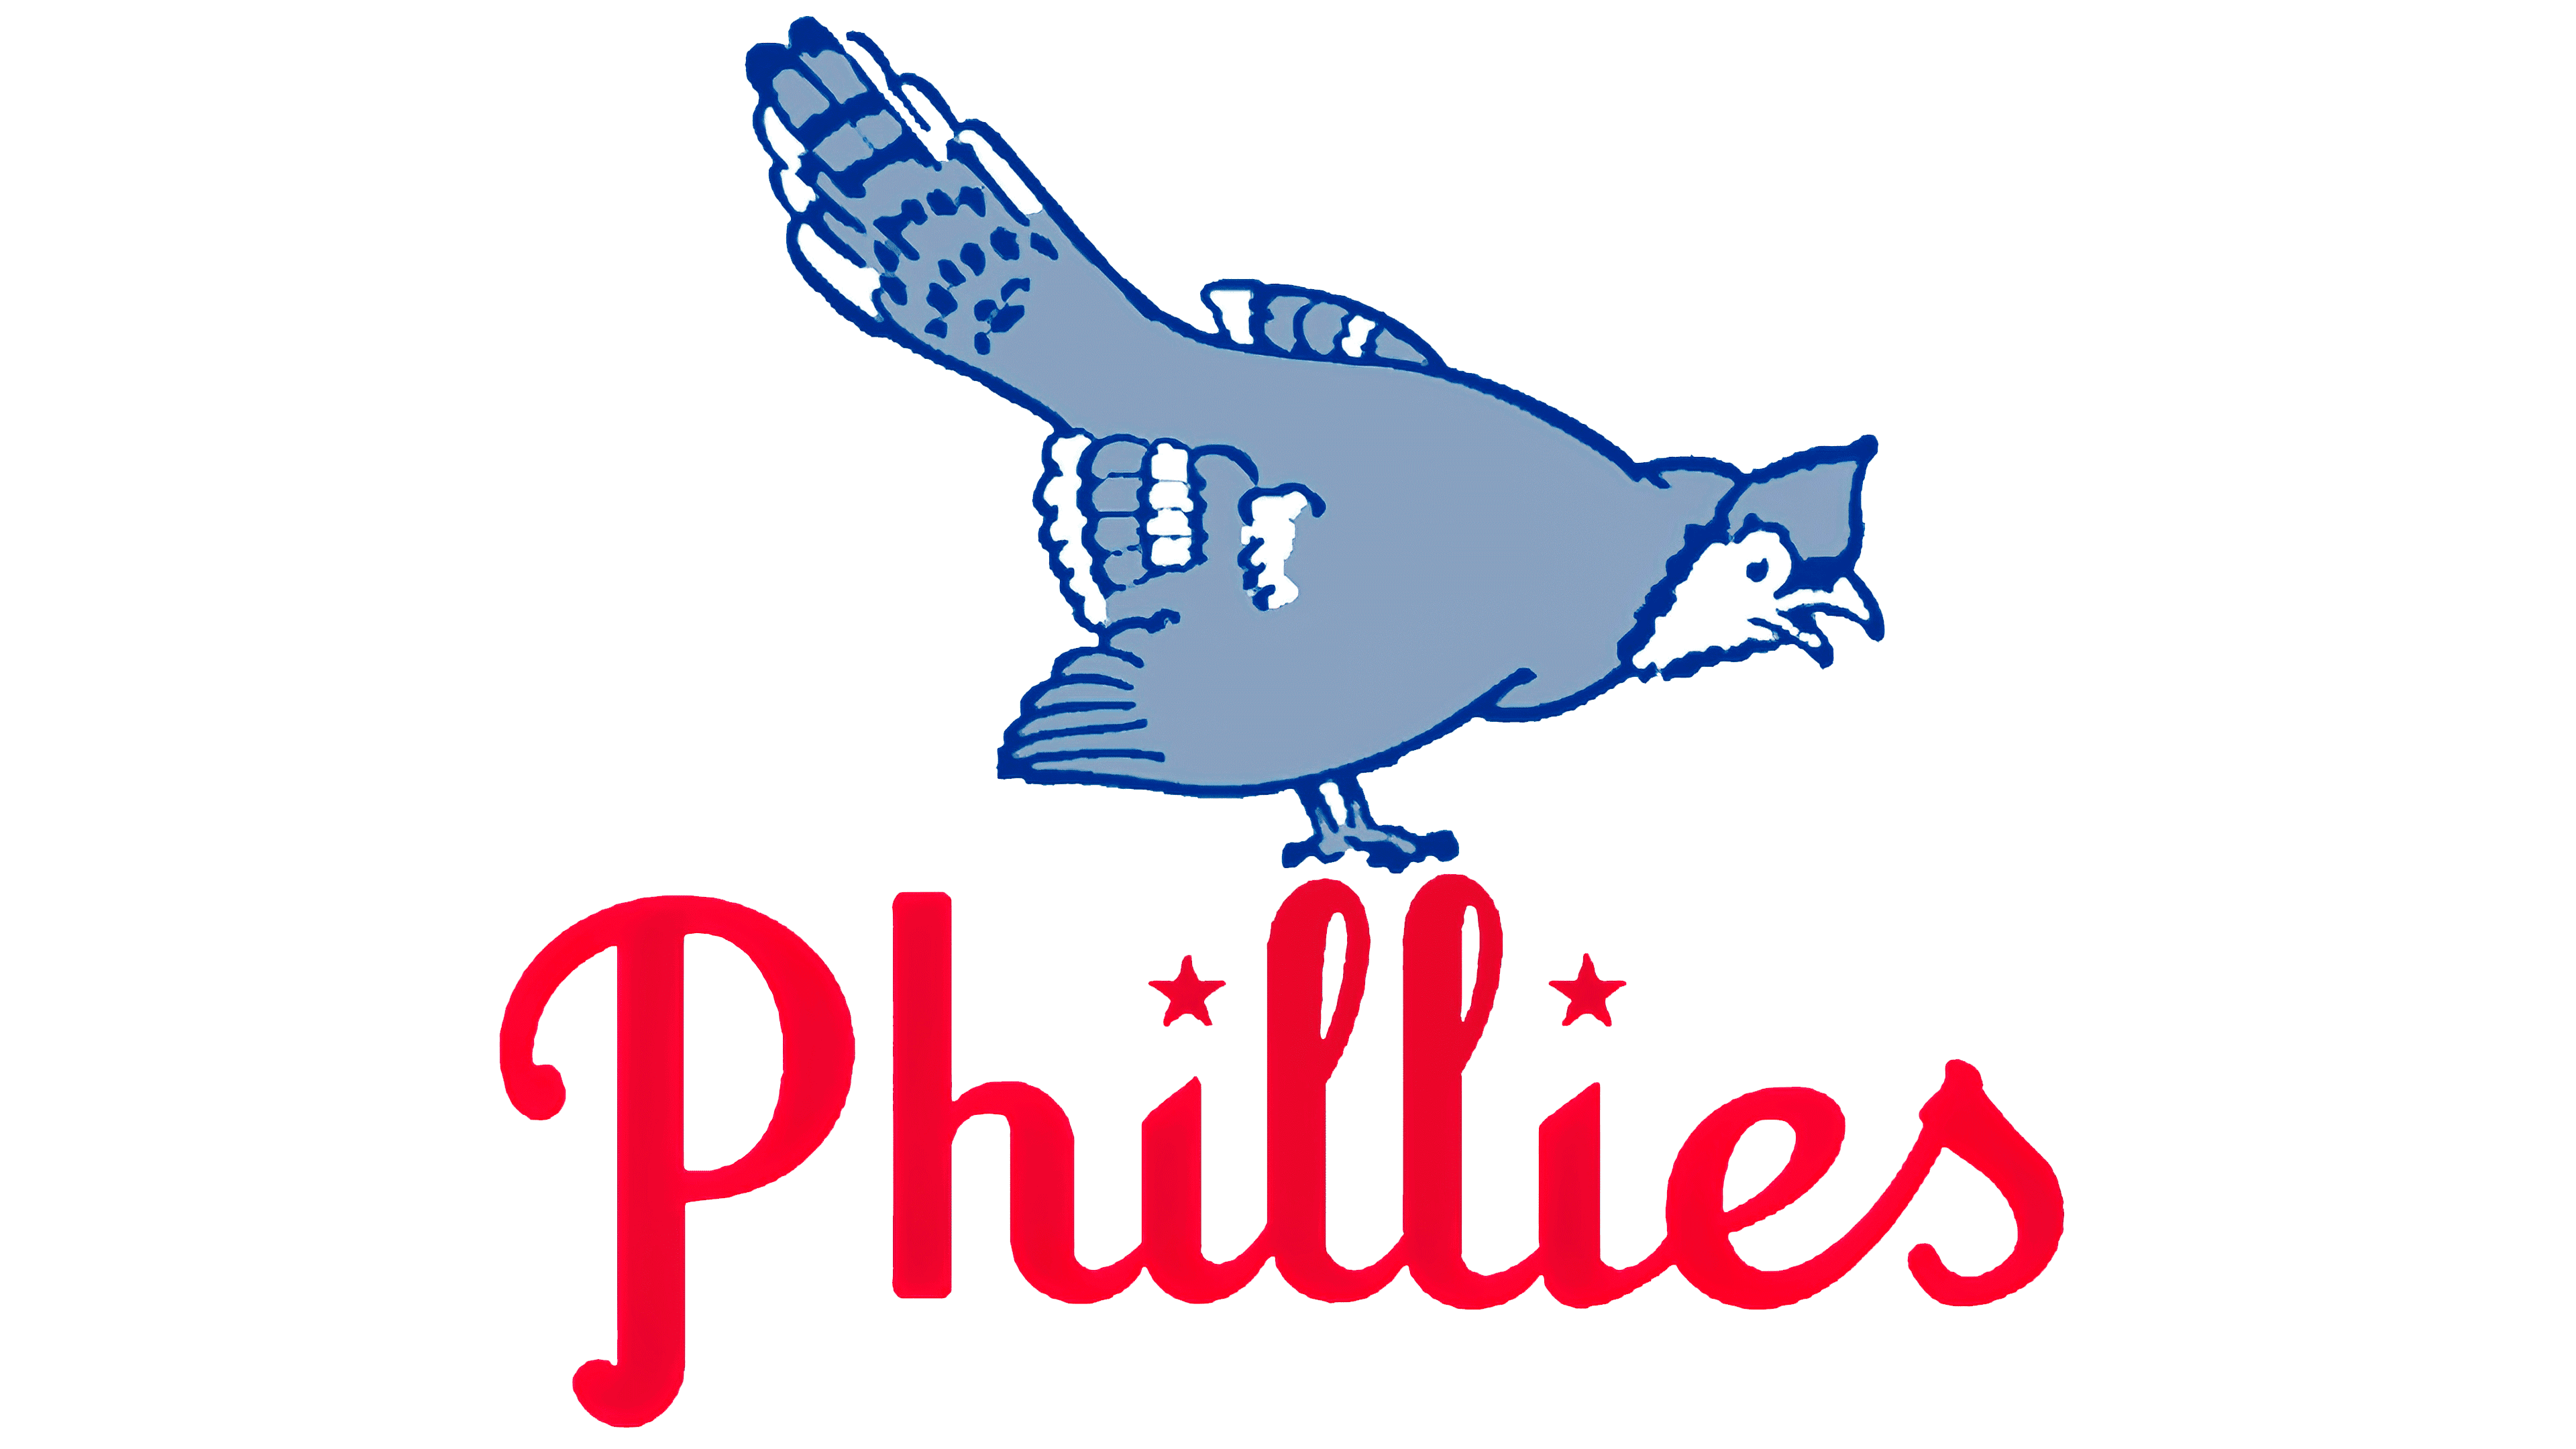 phillies font name